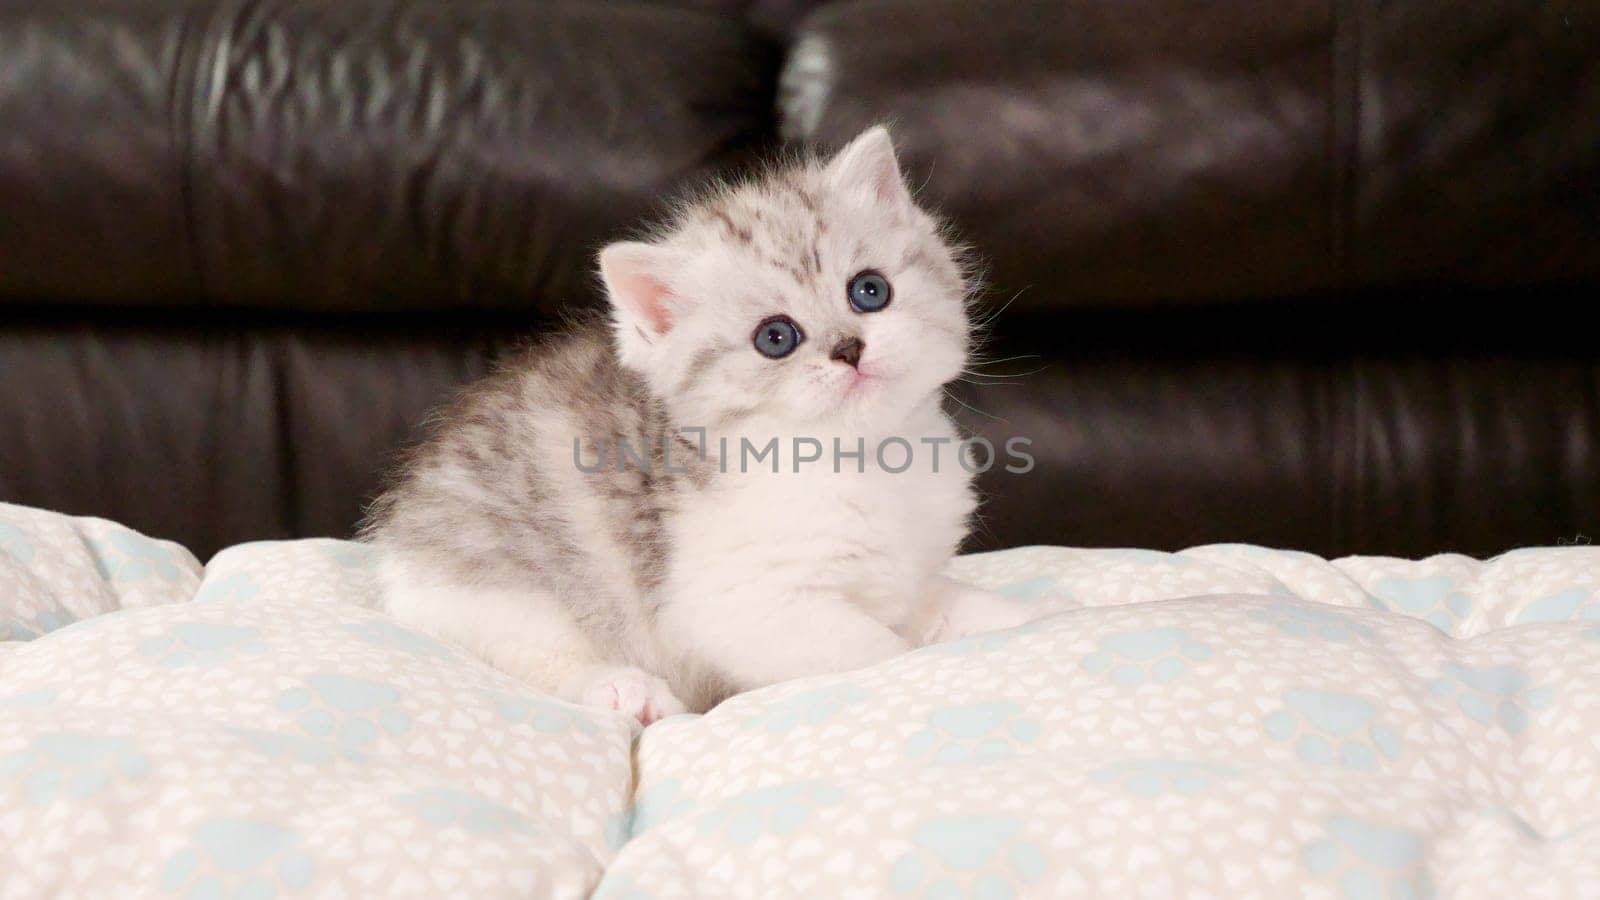 Fluffy white and tabby kitten looking at camera on brown background, front view, space for text. Cute young shorthair stripped cat with blue eyes. by JuliaDorian